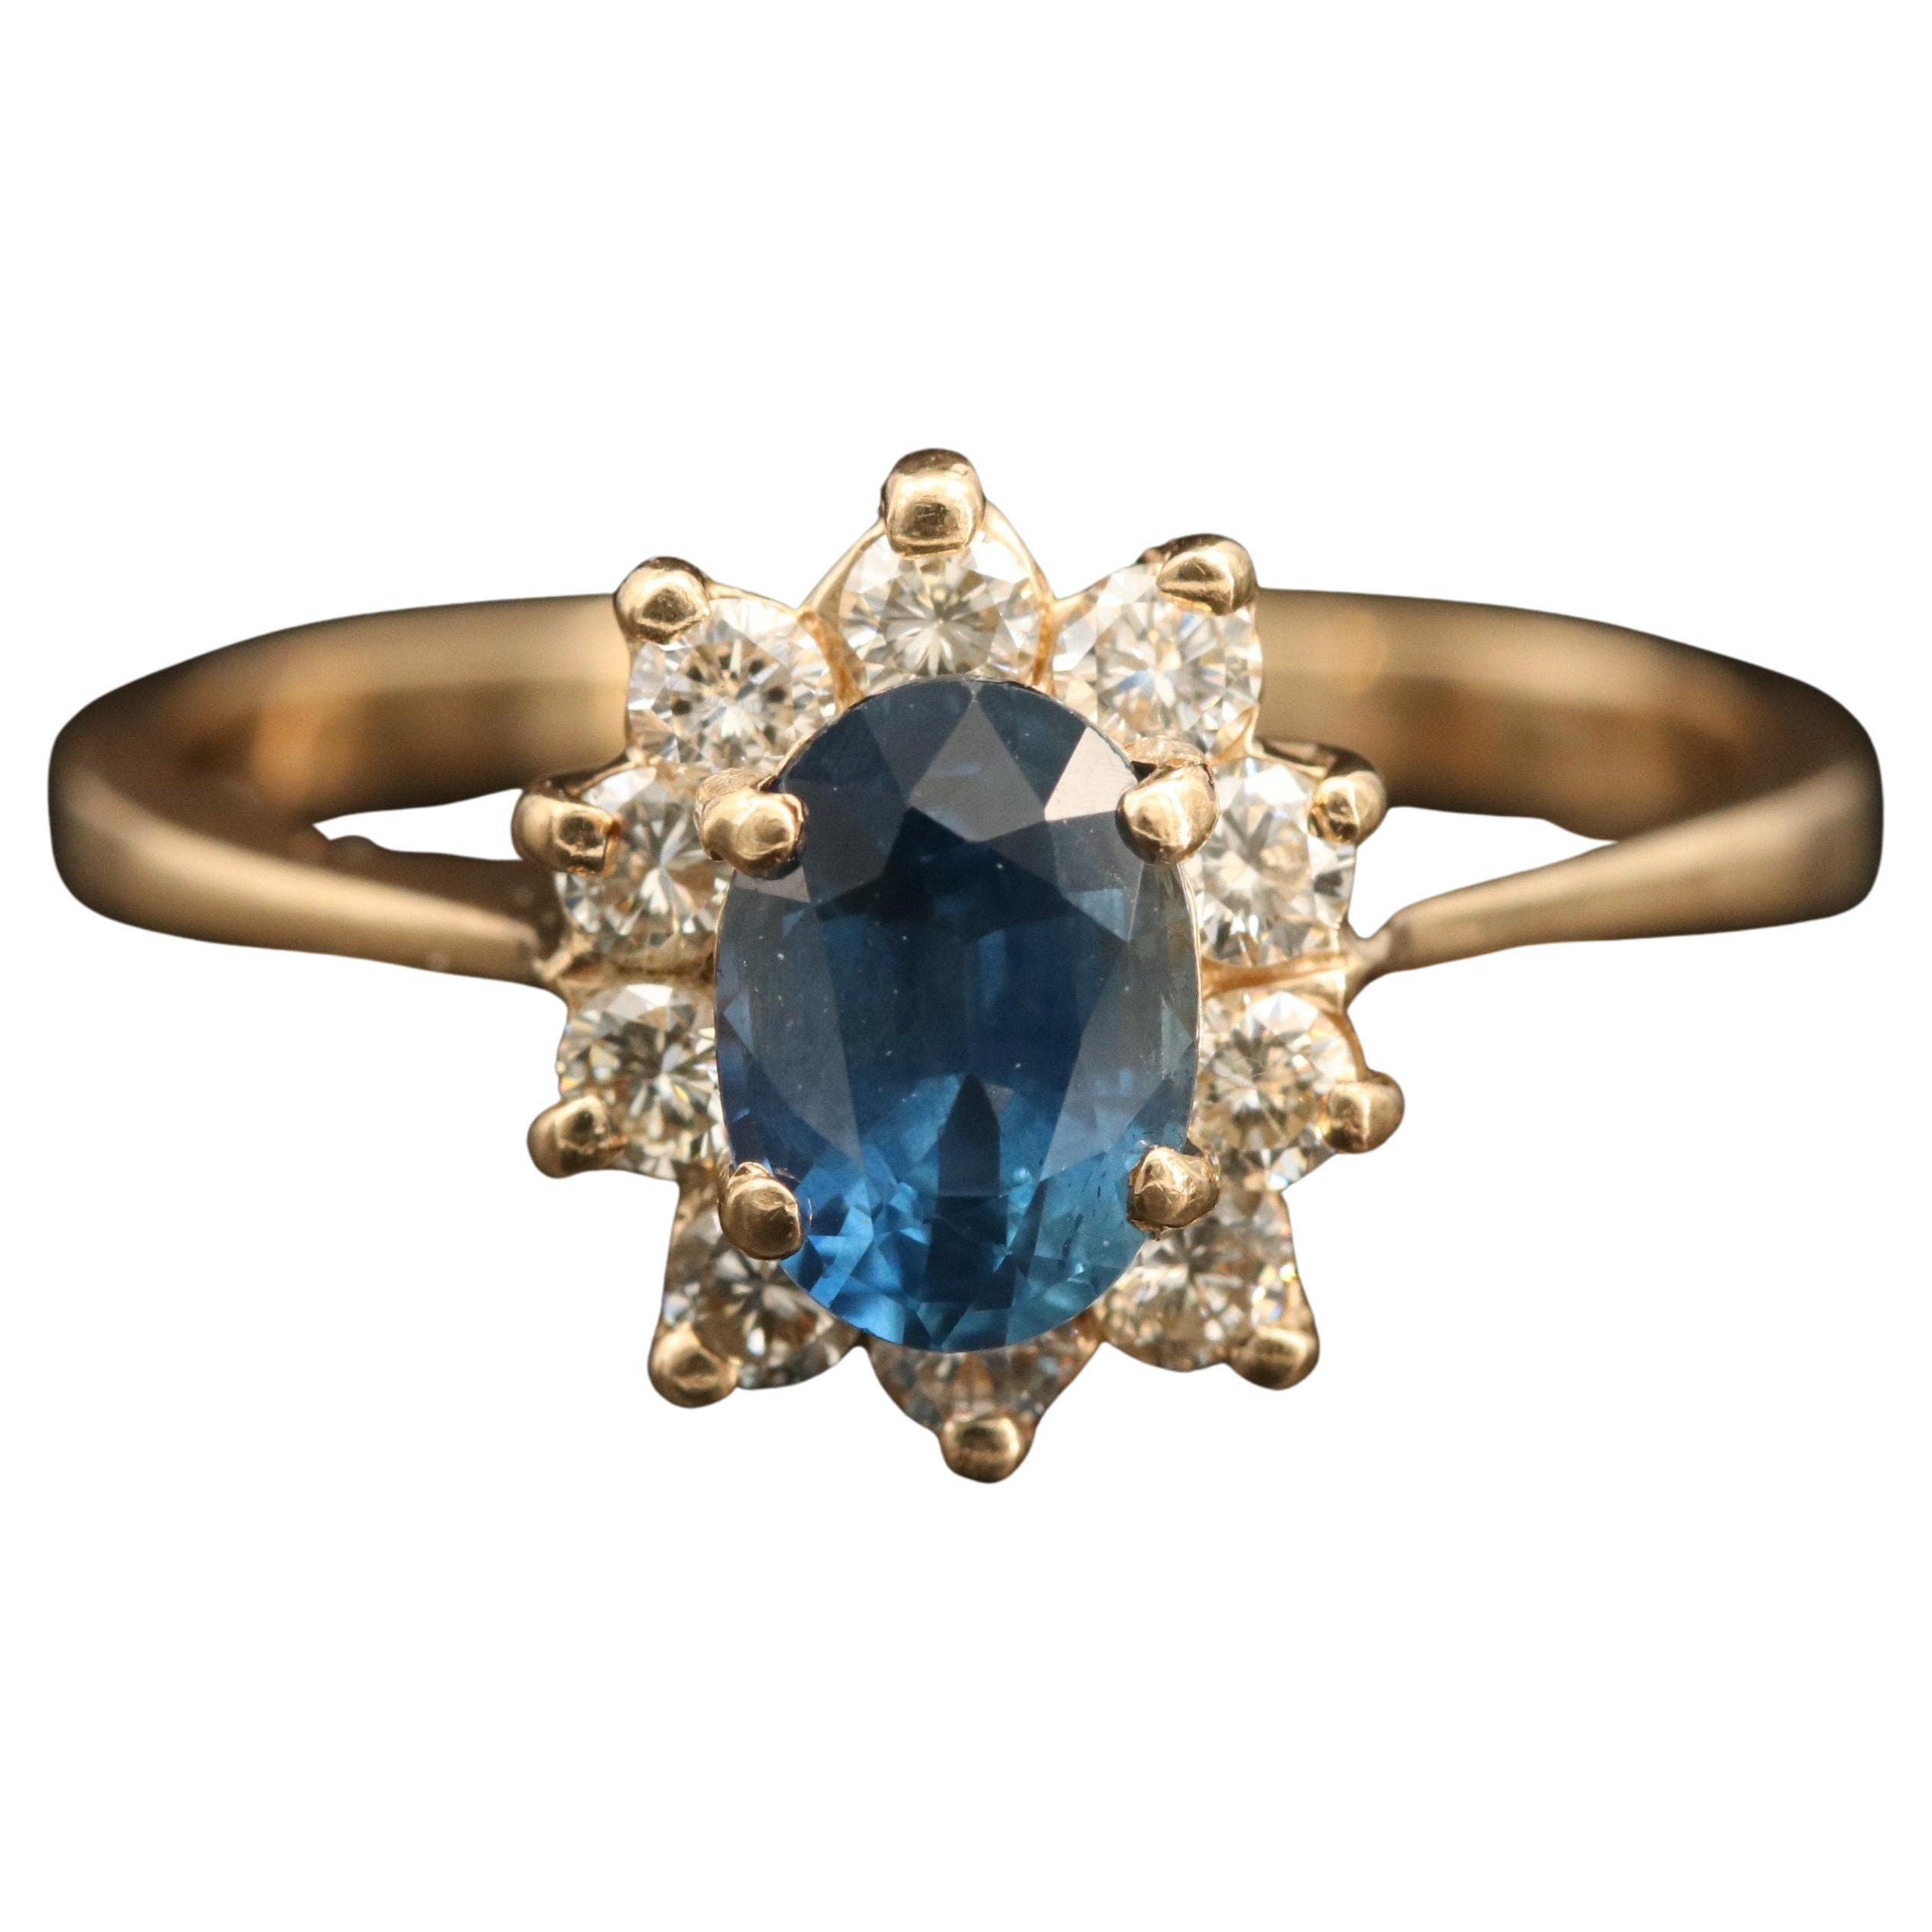 For Sale:  Unique Natural Sapphire Diamond Engagement Ring Set in 18K Gold, Cocktail Ring